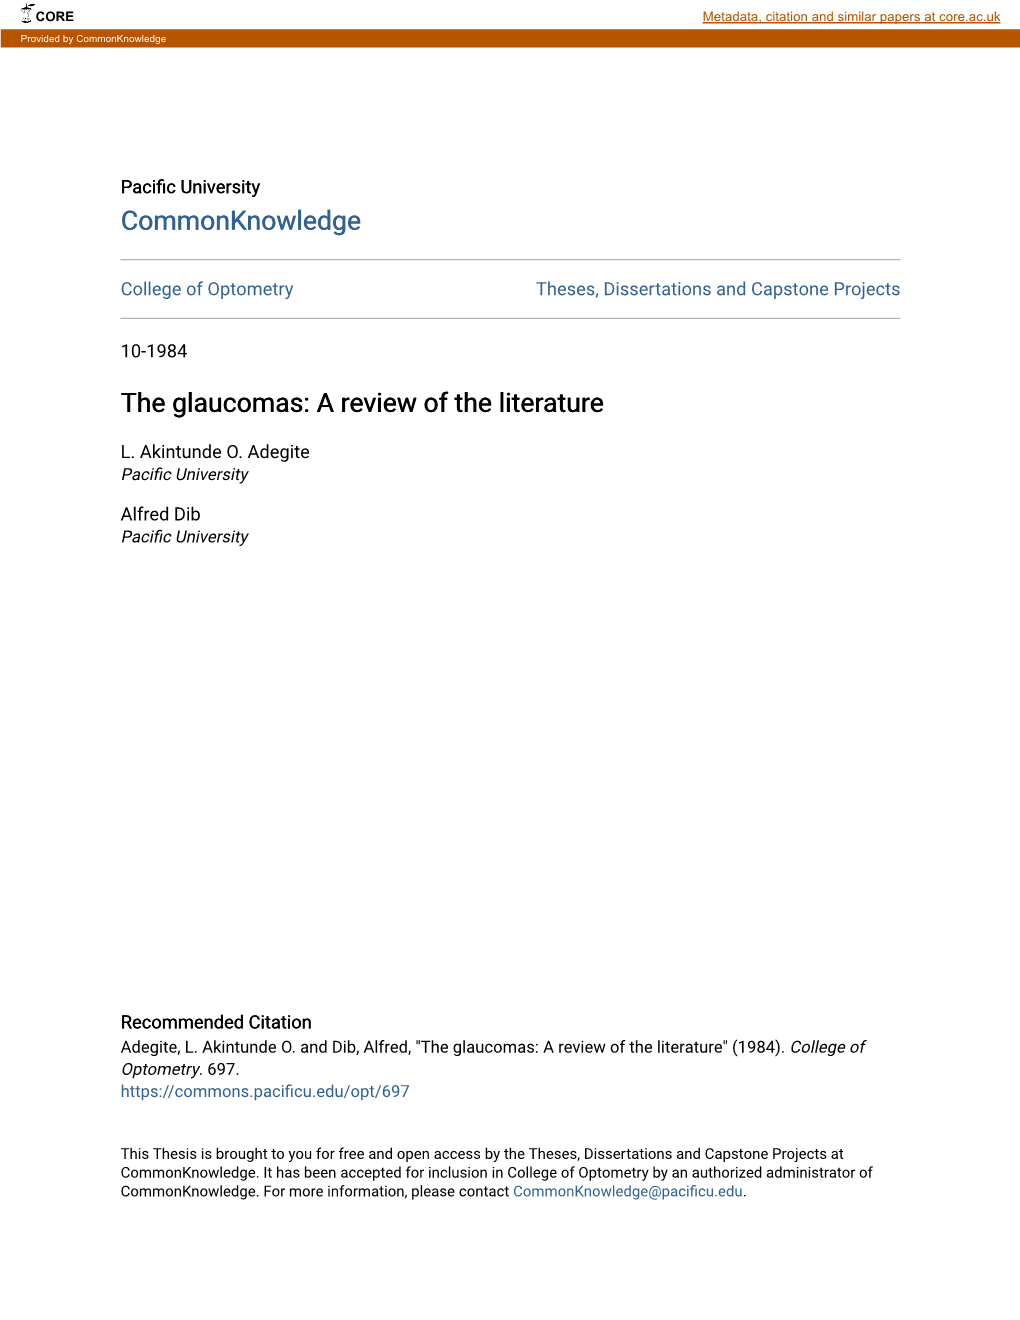 The Glaucomas: a Review of the Literature